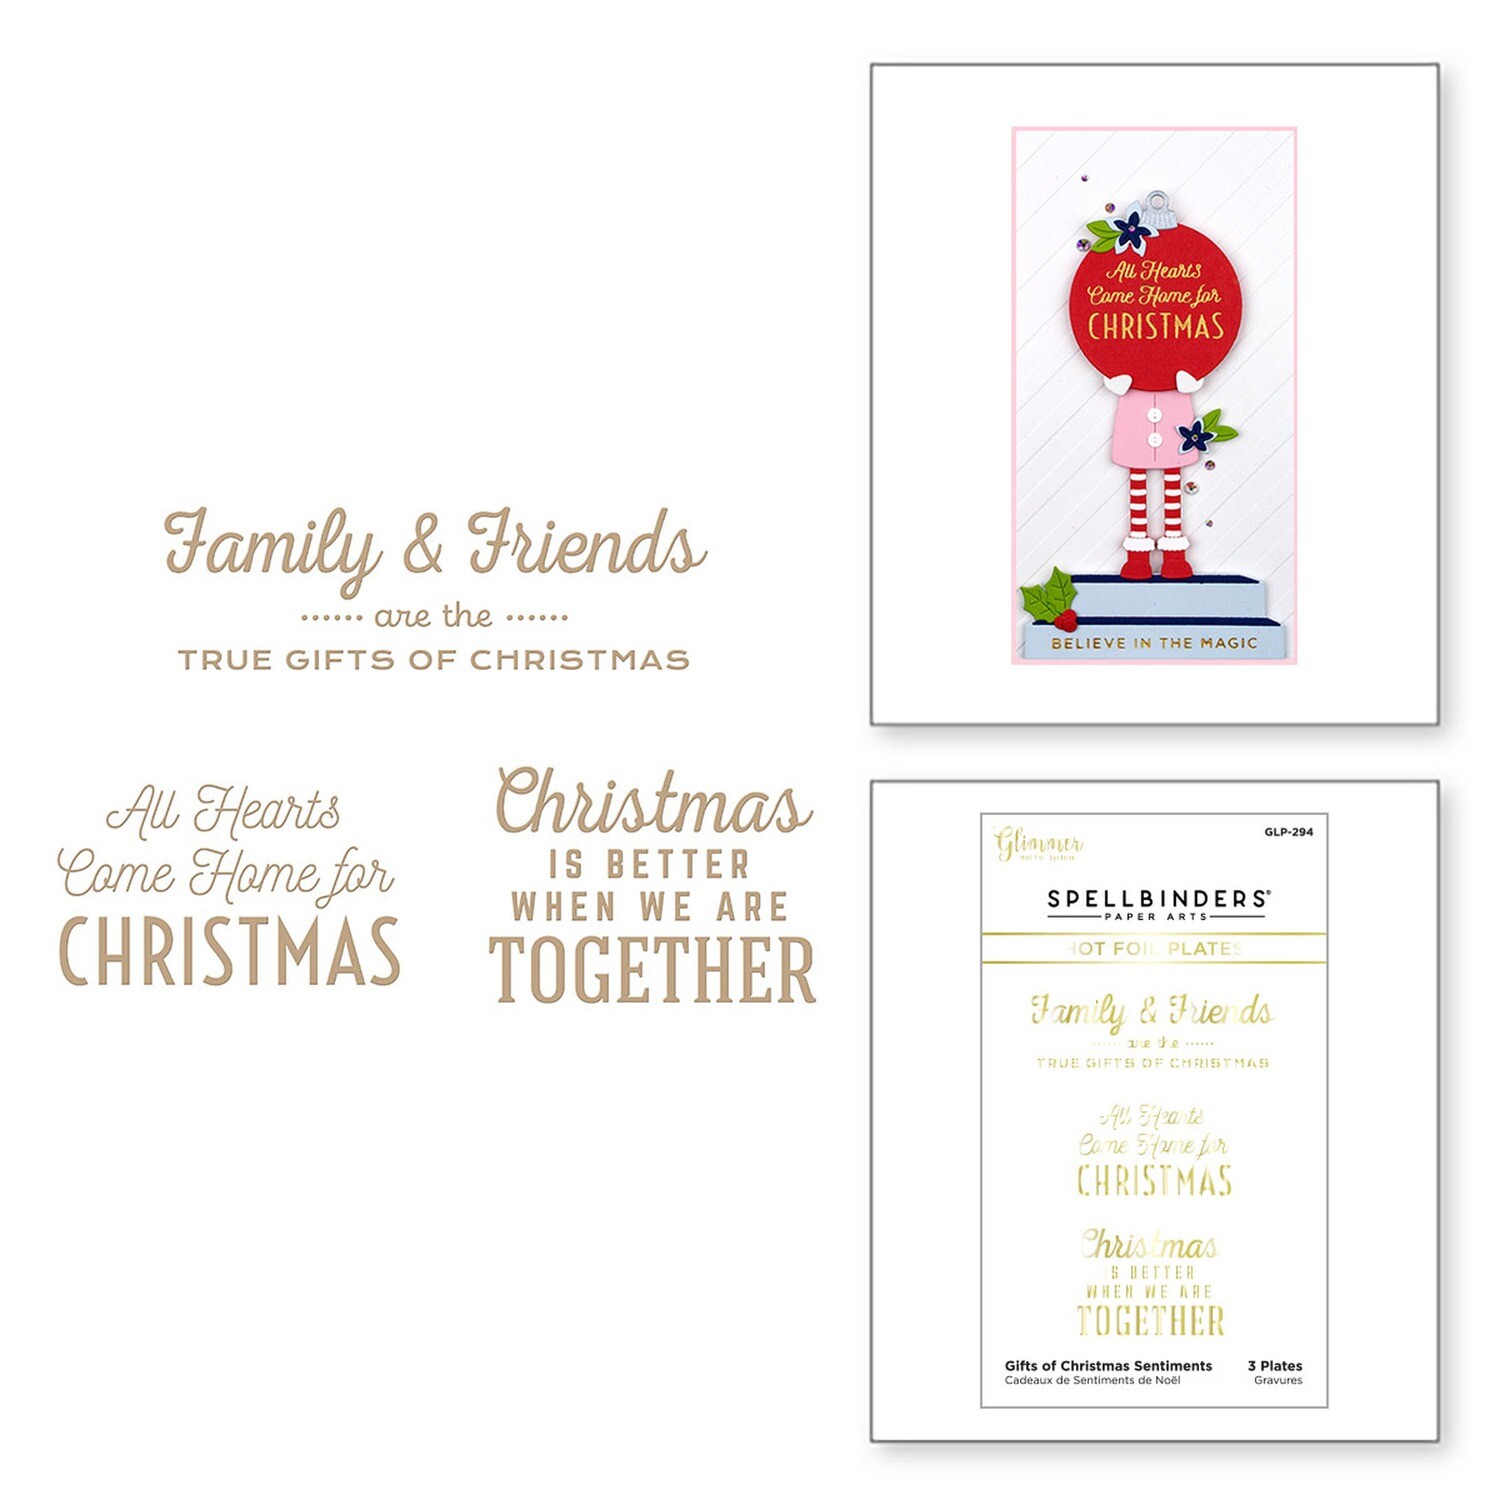 Spellbinders Glimmer Hot Foil Plate - Gifts Of Christmas Sentiments